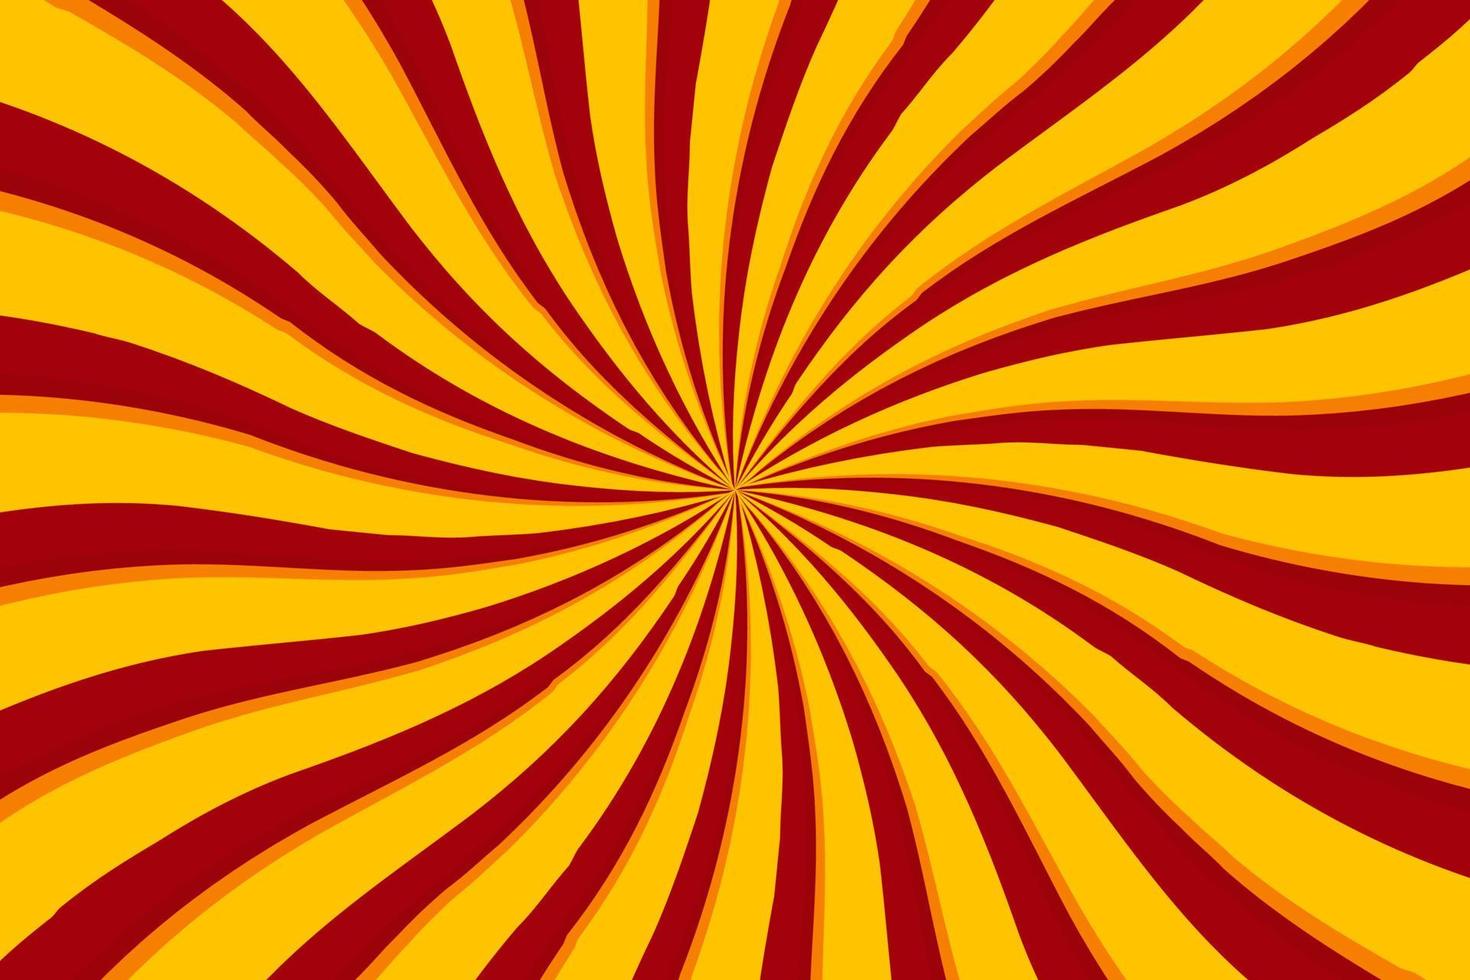 Red and yellow swirl sunburst abstract retro background design vector